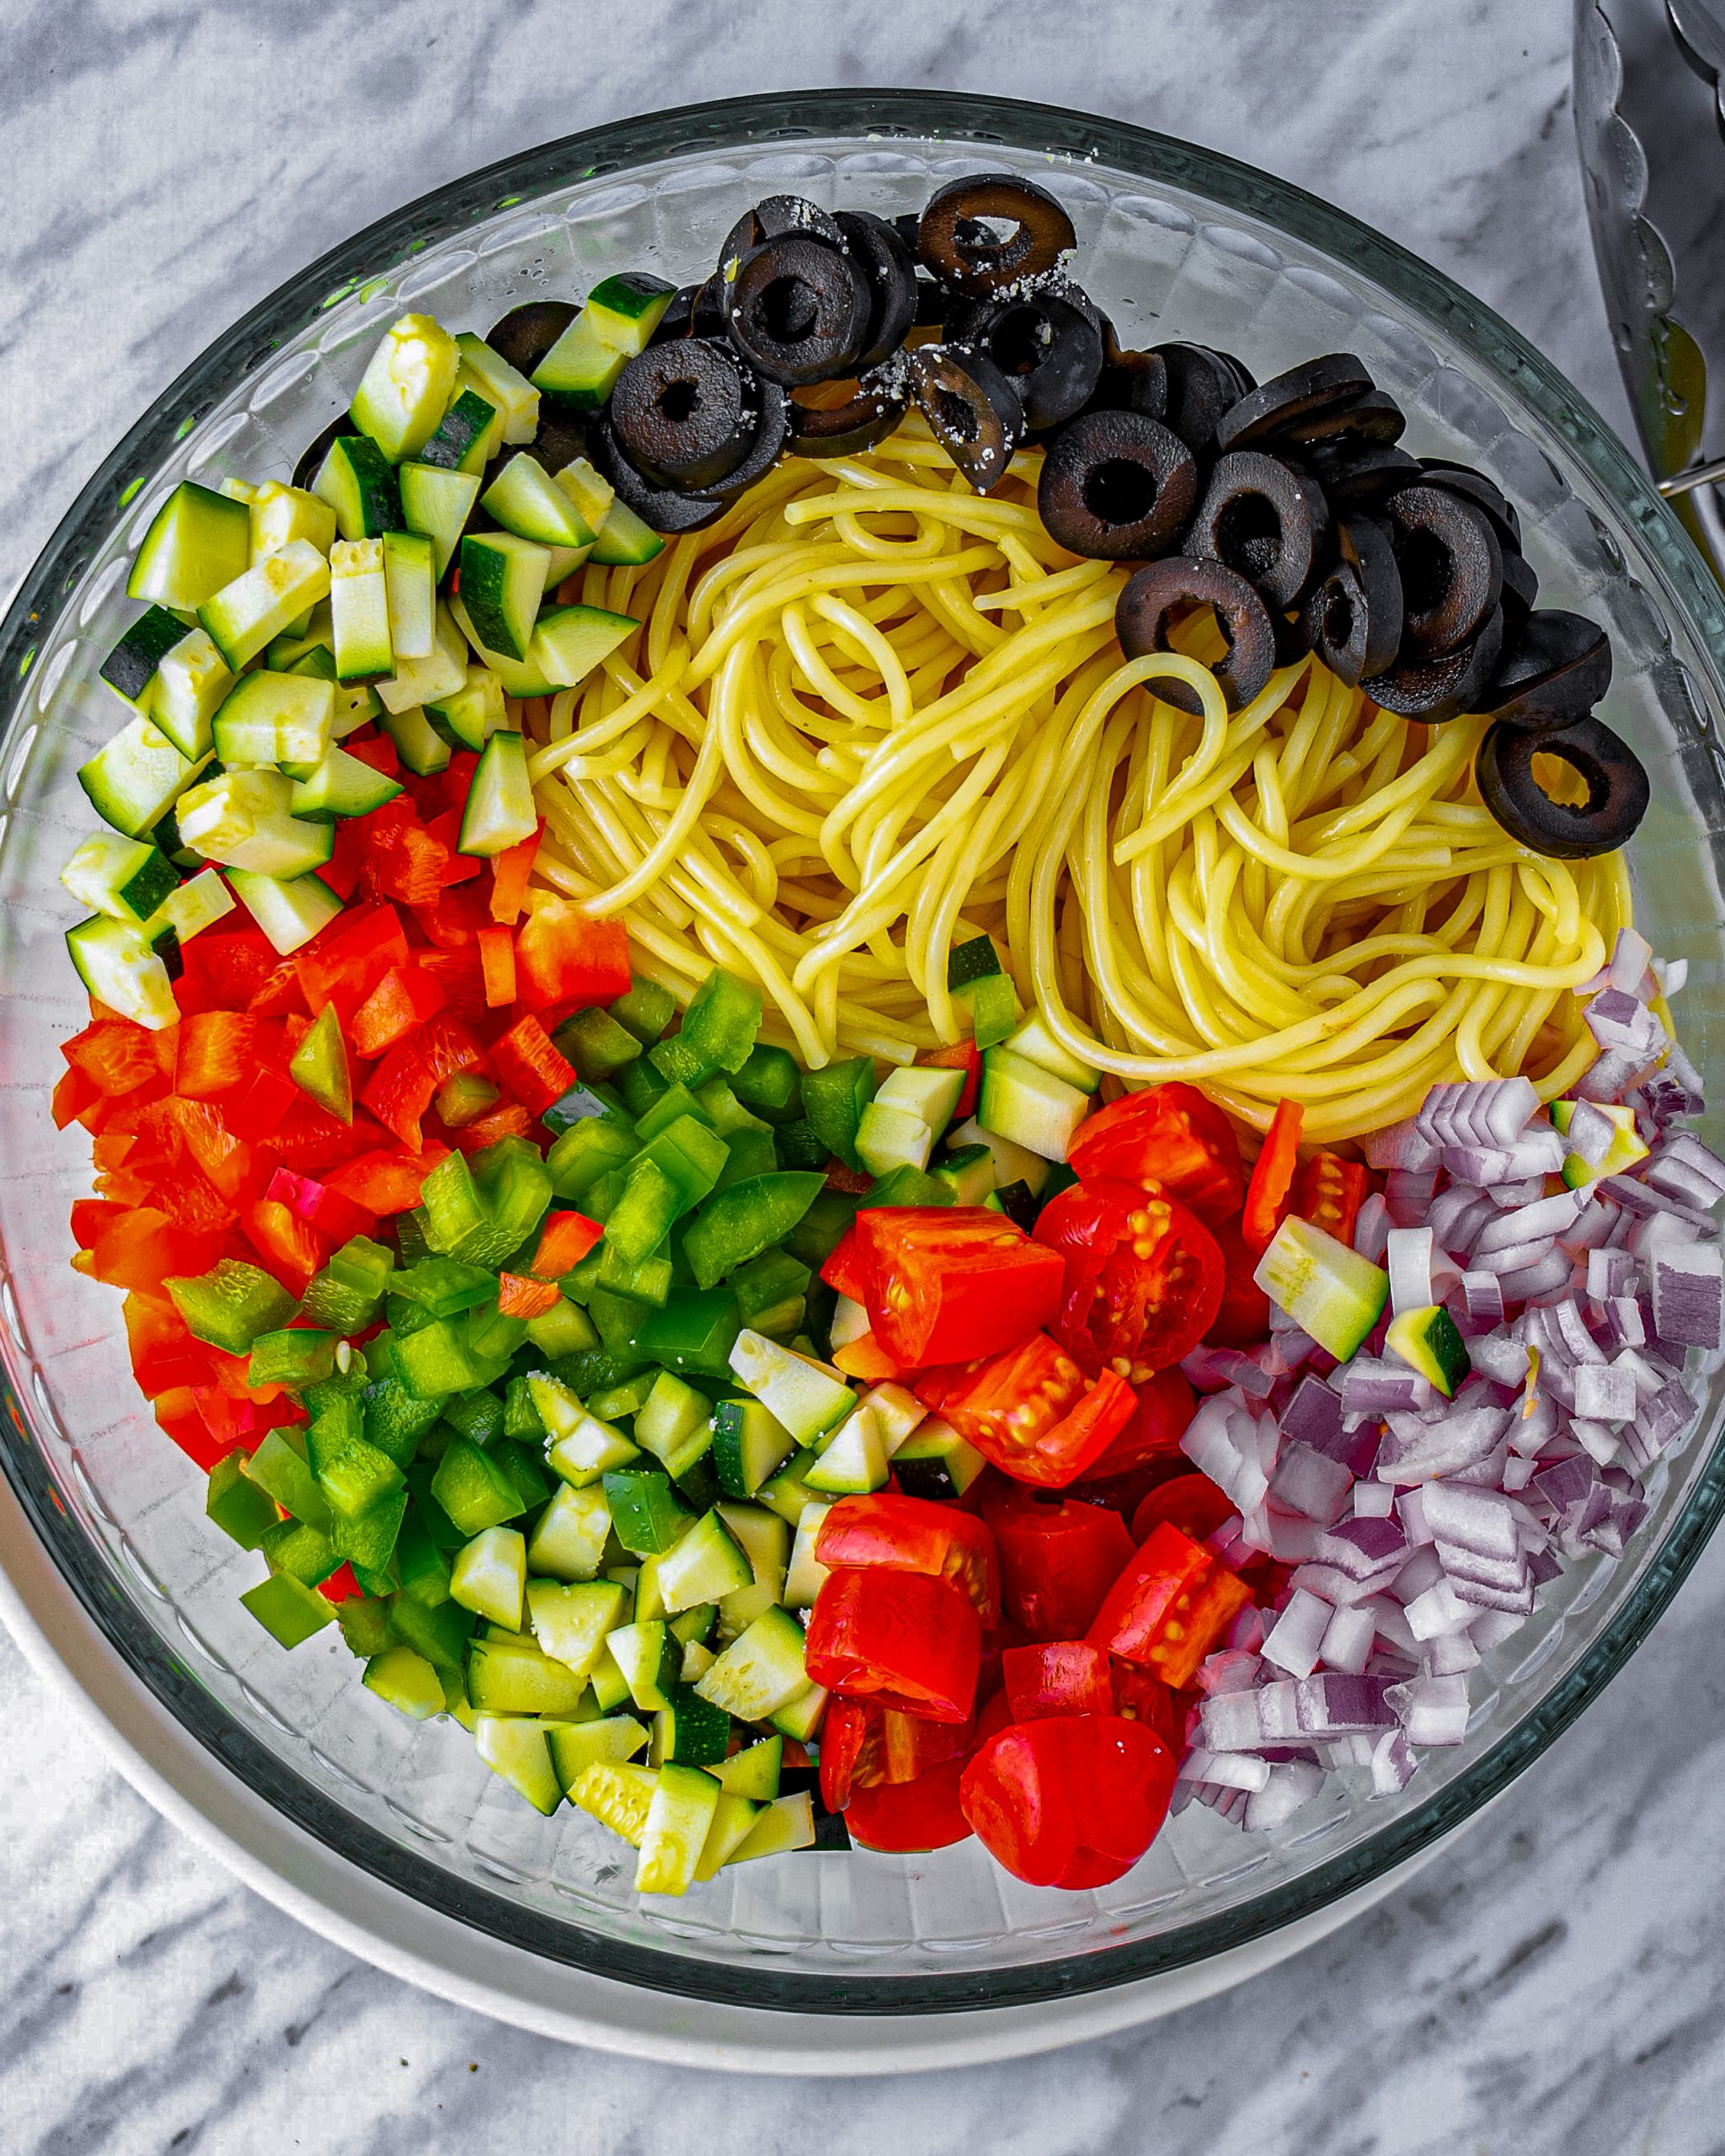 In a large mixing bowl, combine the spaghetti, red bell pepper, green bell pepper, cucumber, zucchini, tomatoes, red onion, and black olives.